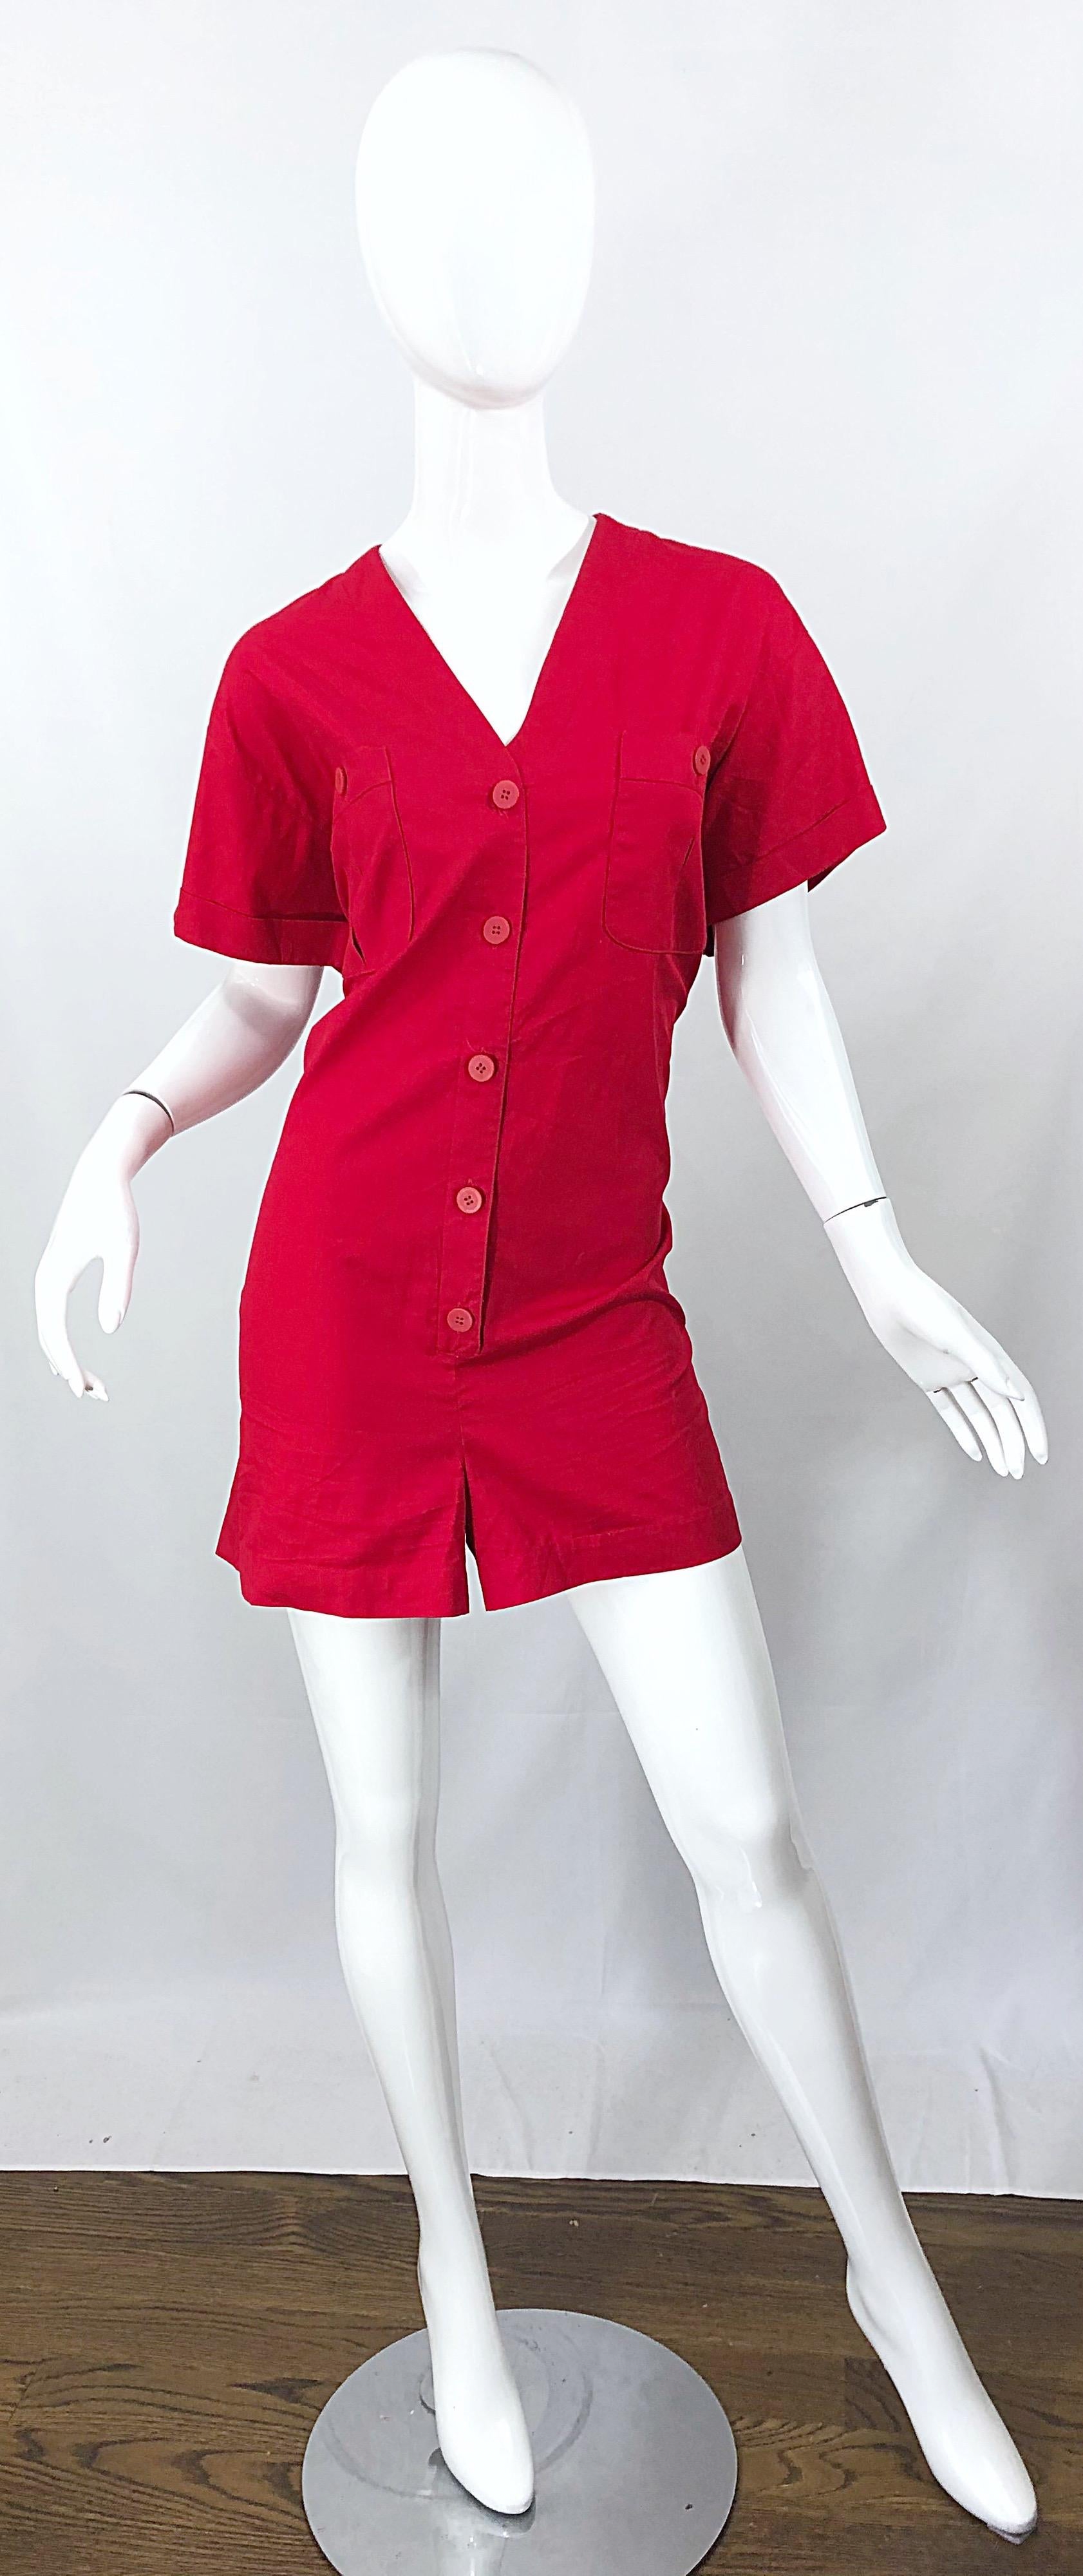 Women's NWT Vintage Christian Dior Romper Size 14 Lipstick Red Cotton One Piece Jumpsuit For Sale